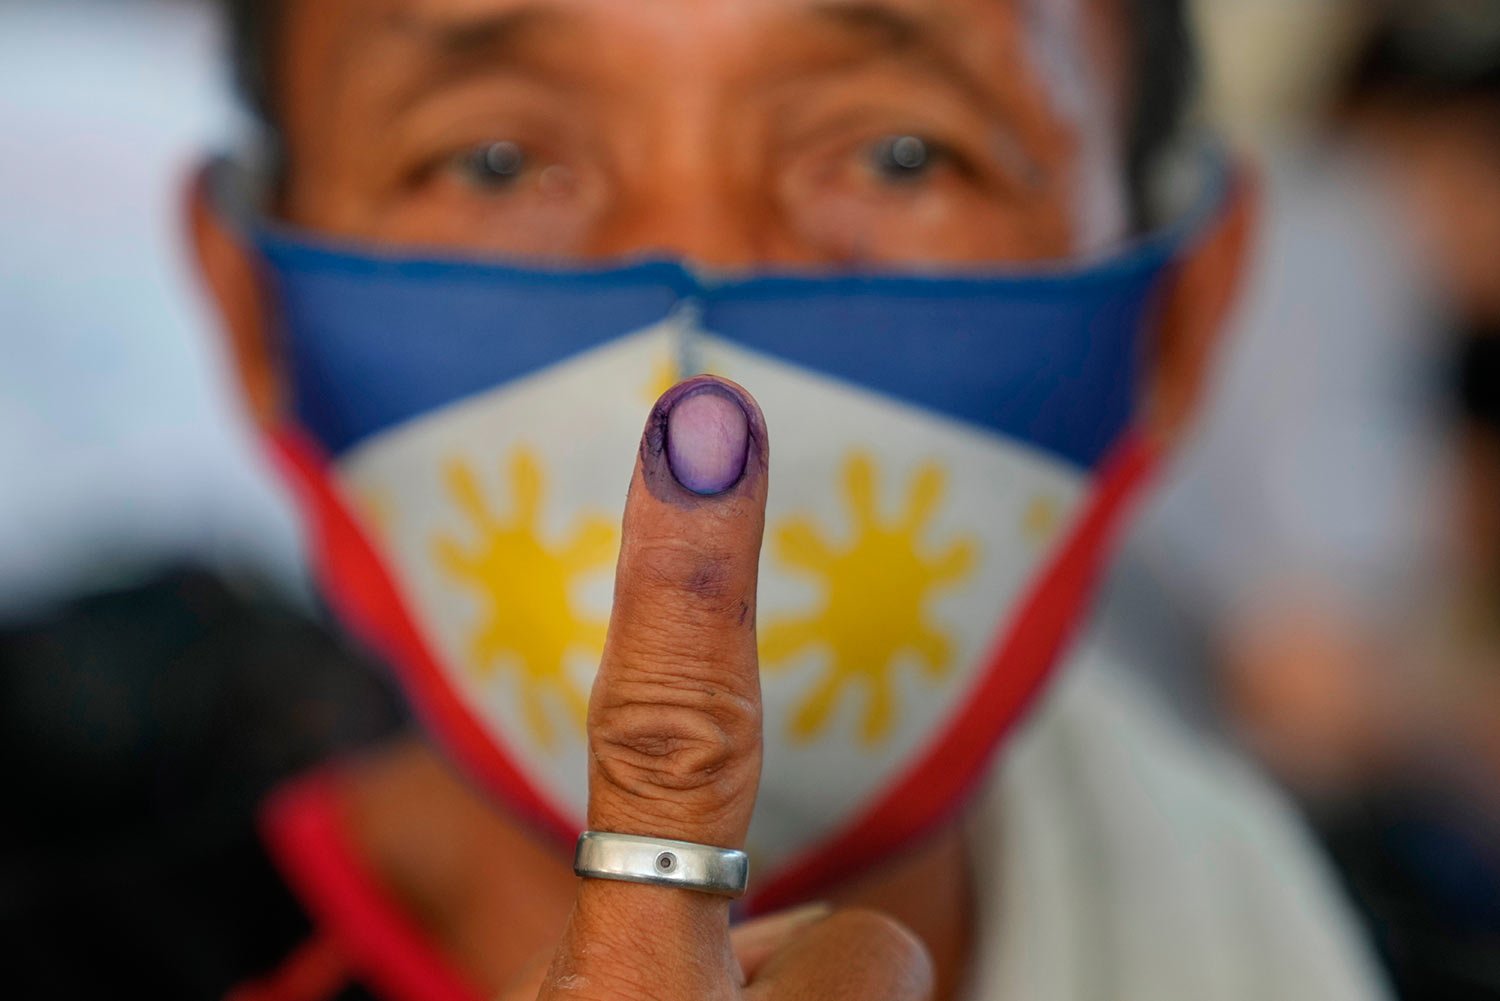  Raul Bragais, 64, shows the ink on his finger to mark that he has finished voting during the opening of elections on Monday, May 9, 2022 in Quezon City, Philippines. (AP Photo/Aaron Favila) 